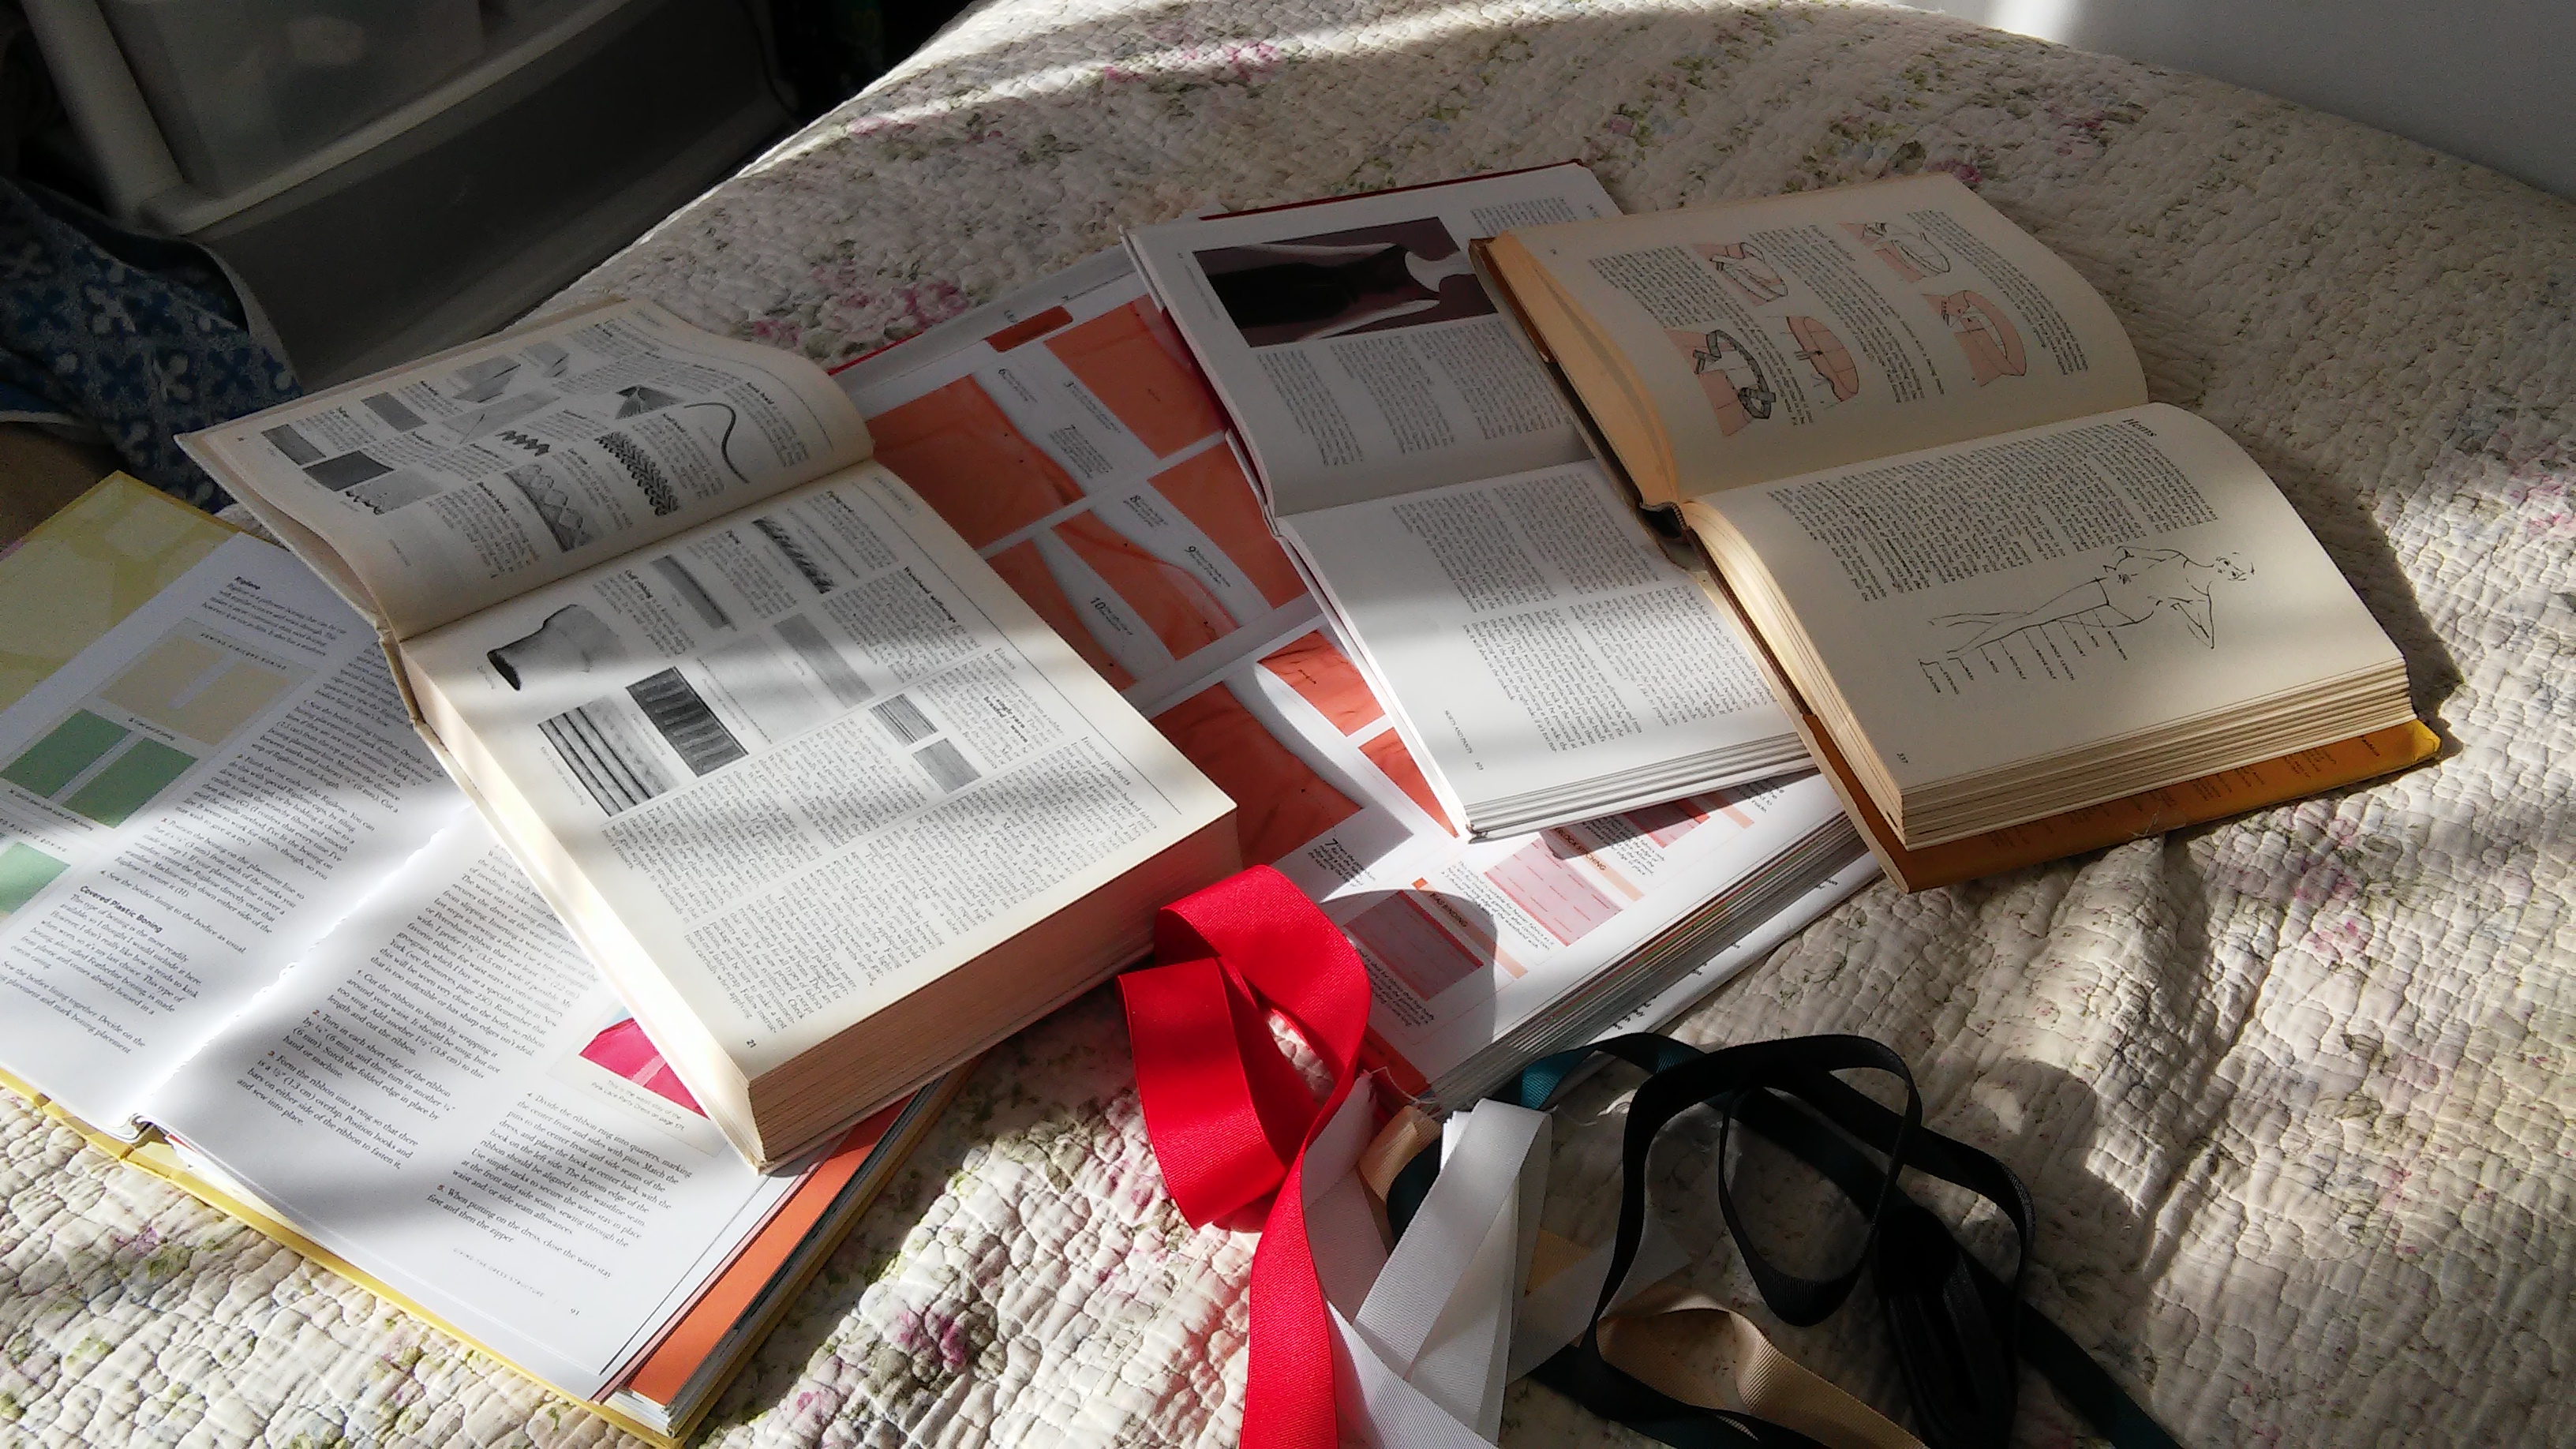 Sewing books with pages on petersham ribbon